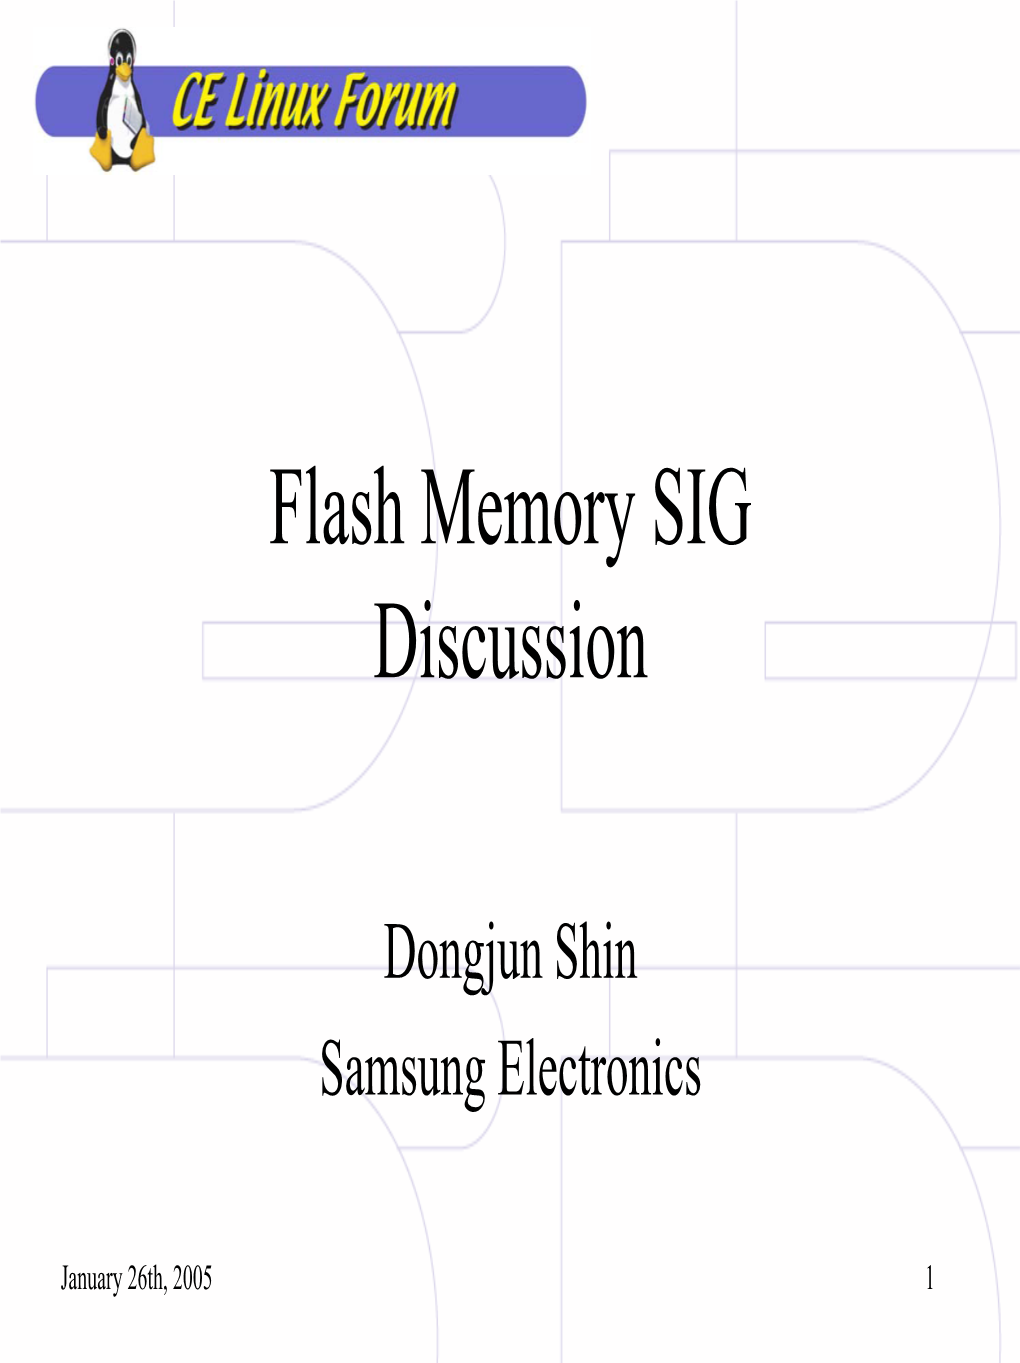 Flash Memory SIG Discussion